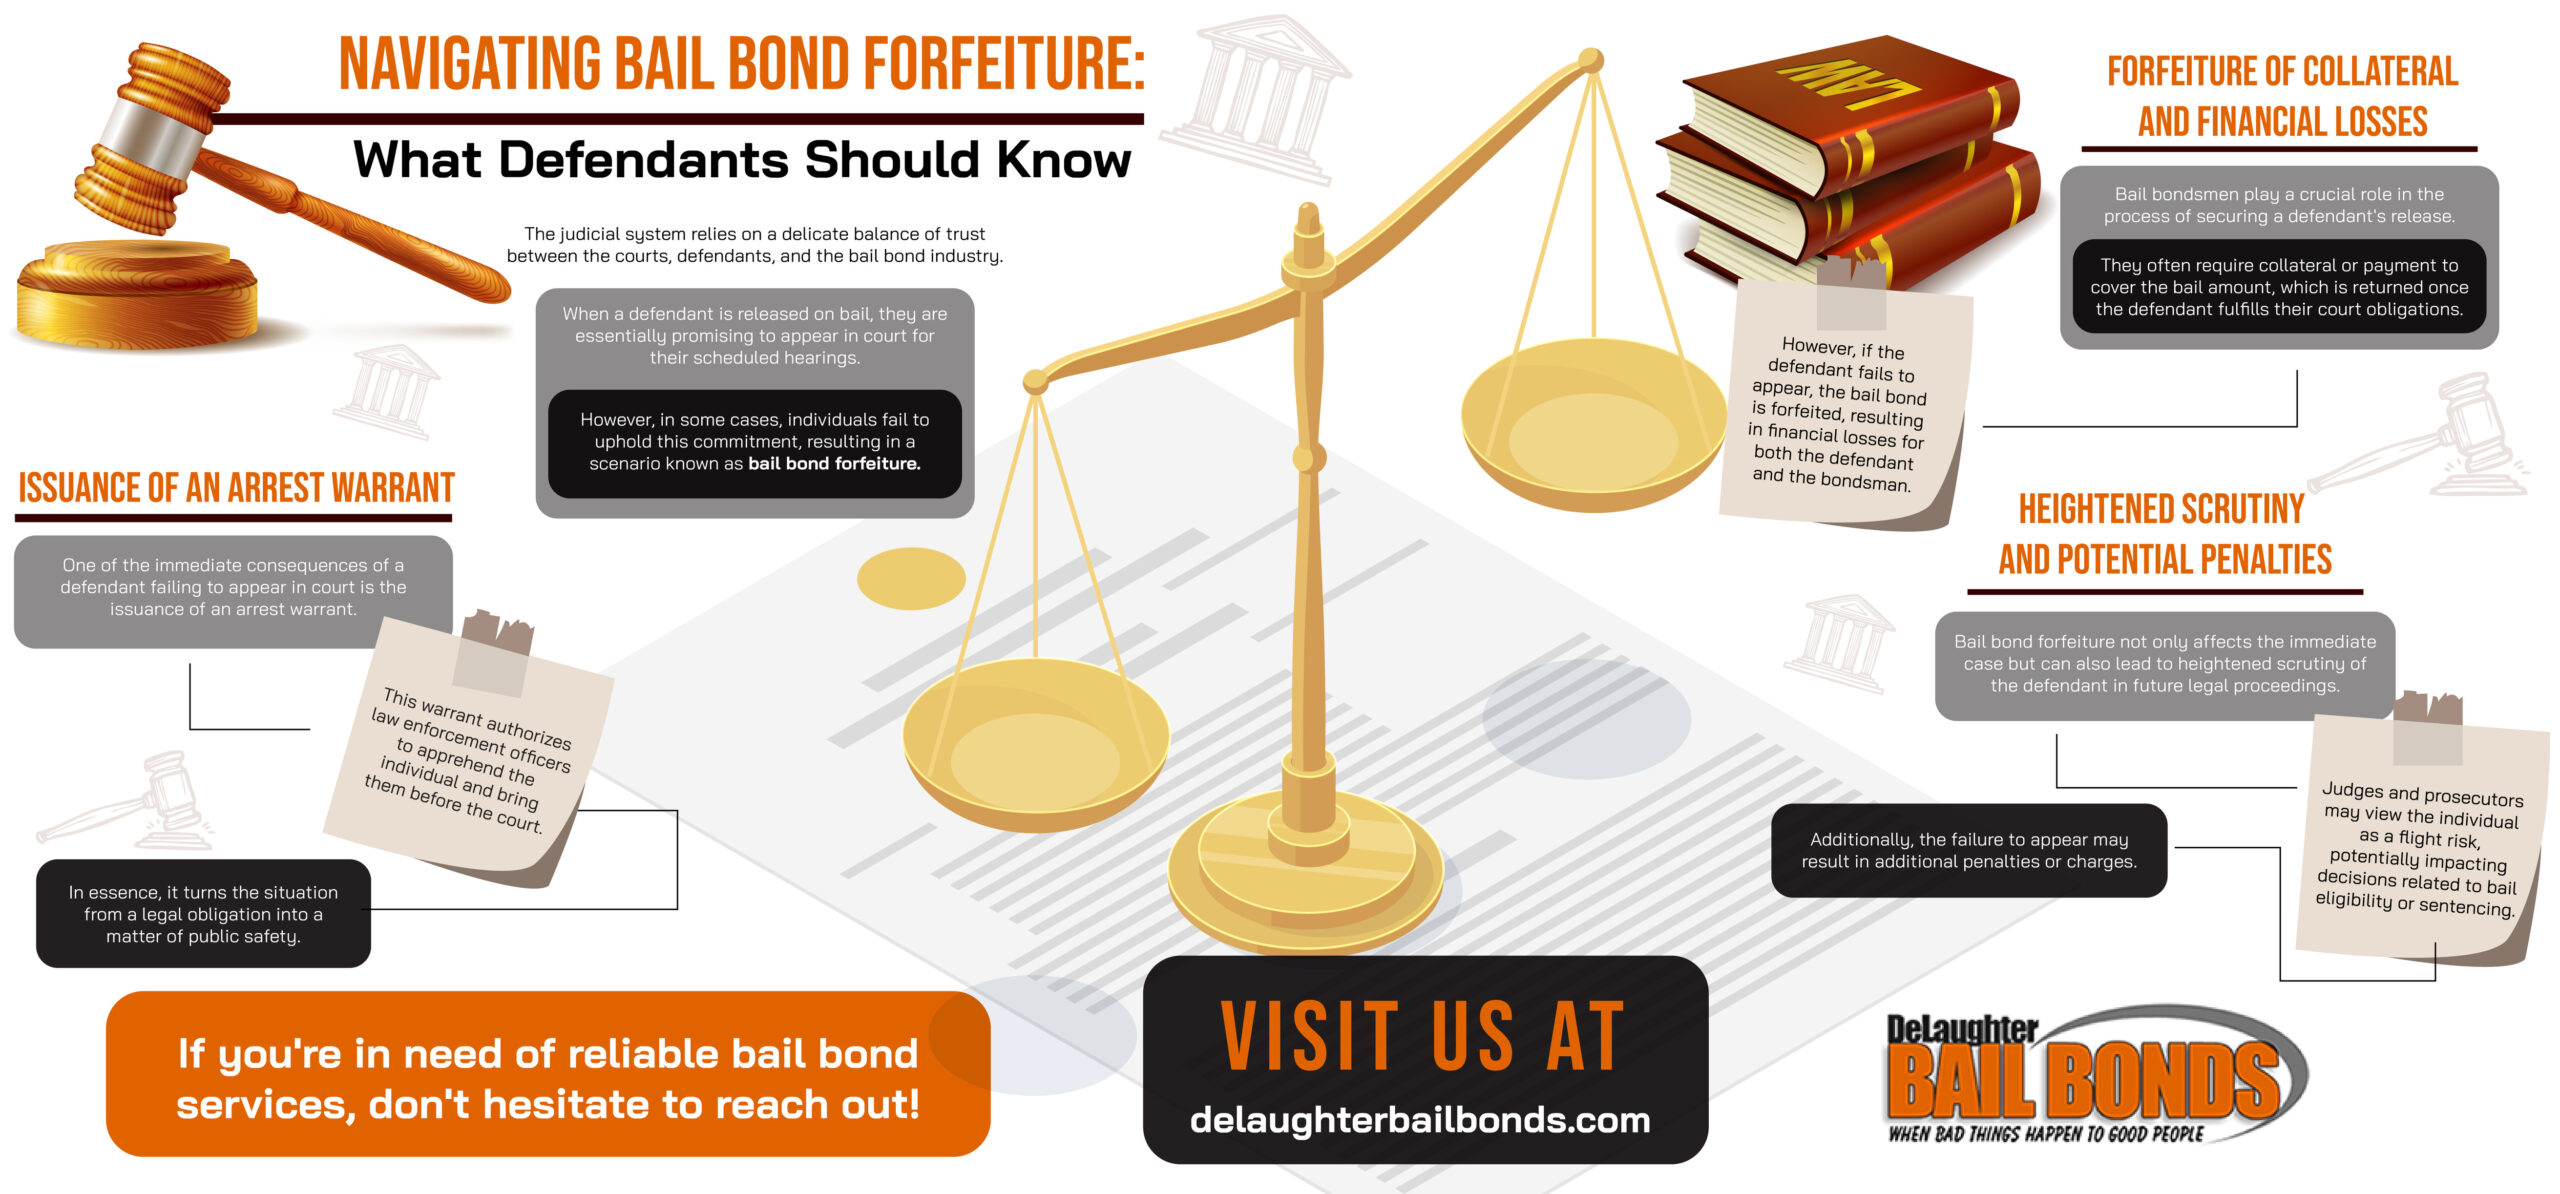 Navigating Bail Bond Forfeiture: What Defendants Should Know